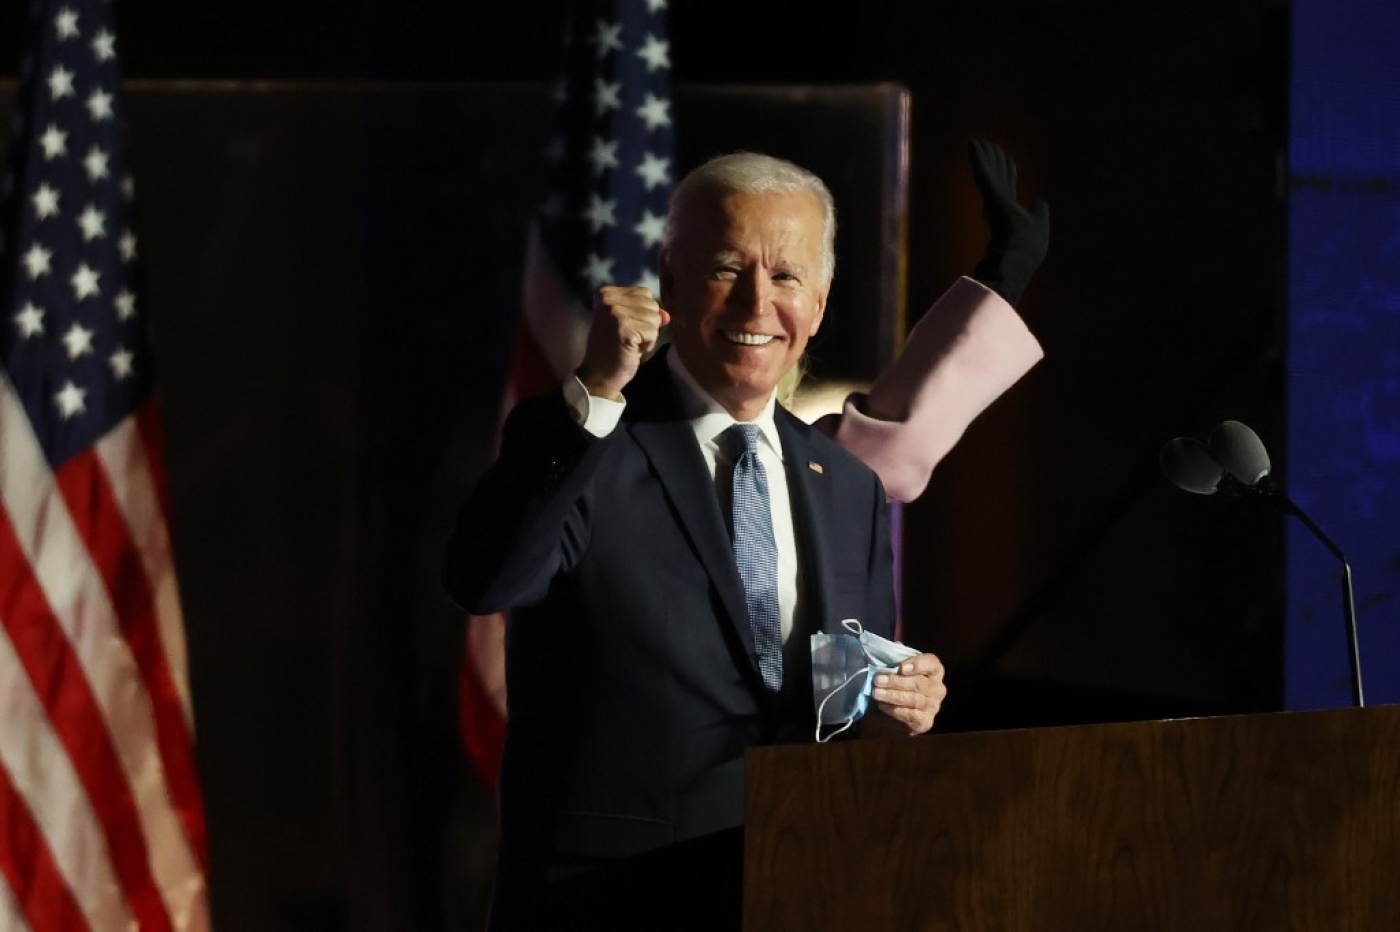 Biden was projected to have obtained the necessary 270 electoral votes needed to win his hard-fought matchup with Trump.